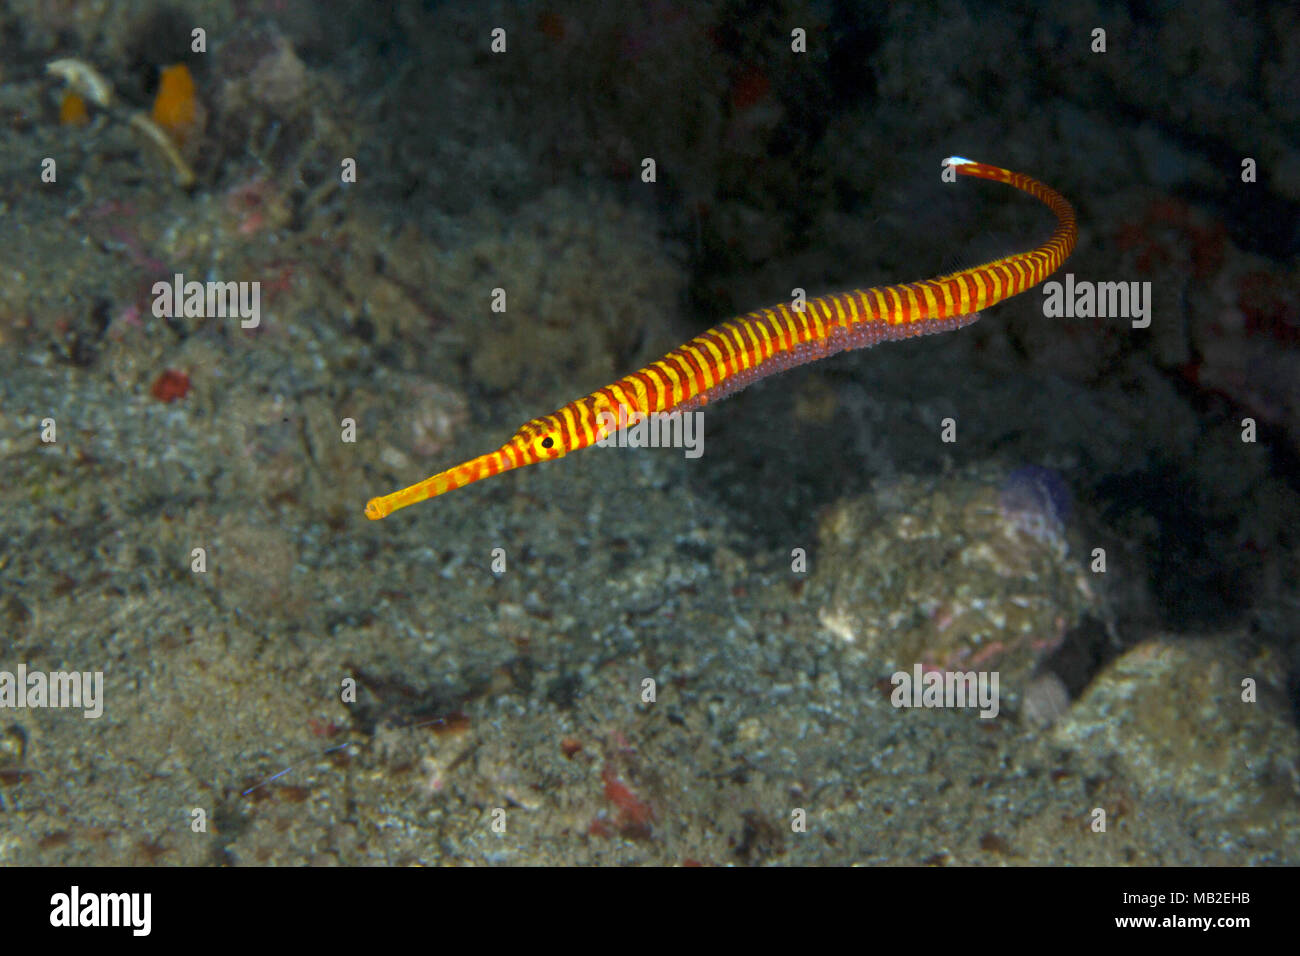 The banded pipefish or ringed pipefish with eggs (Dunckerocampus dactyliophorus). Picture was taken in the Banda sea, Ambon, West Papua, Indonesia Stock Photo